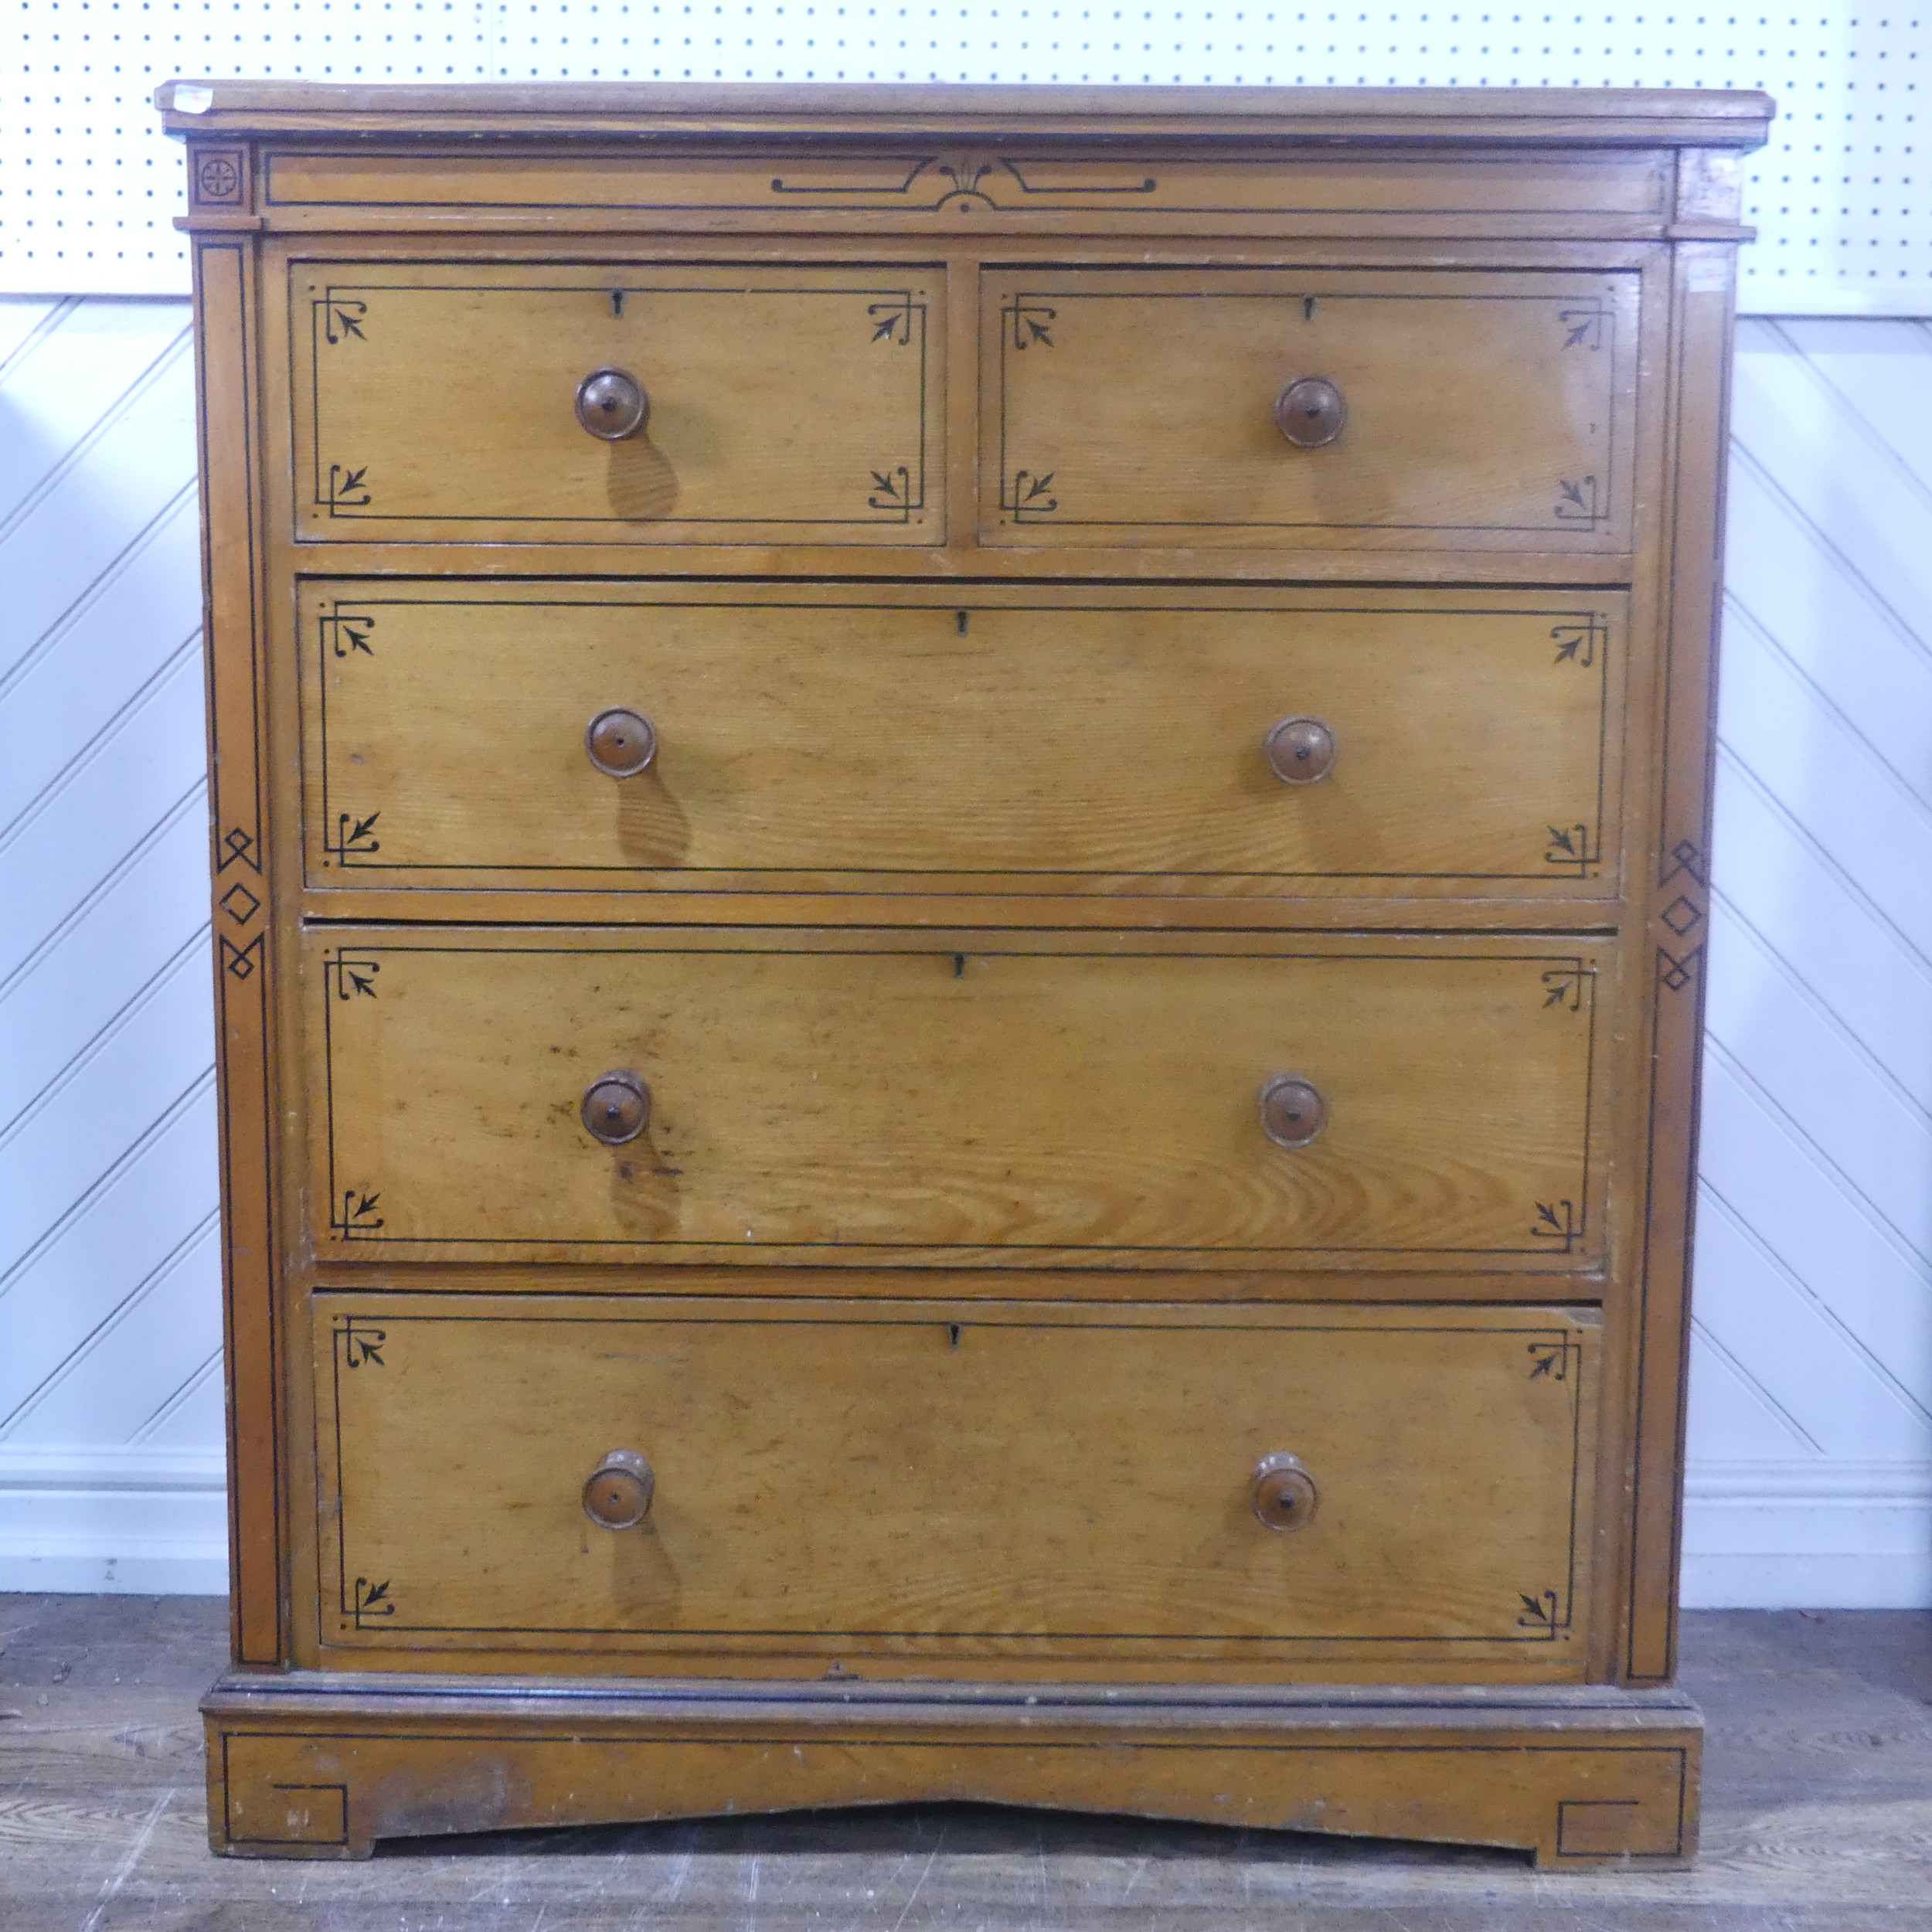 A large Aesthetic Movement pine and oak Chest of drawers, with black painted stringing and geometric